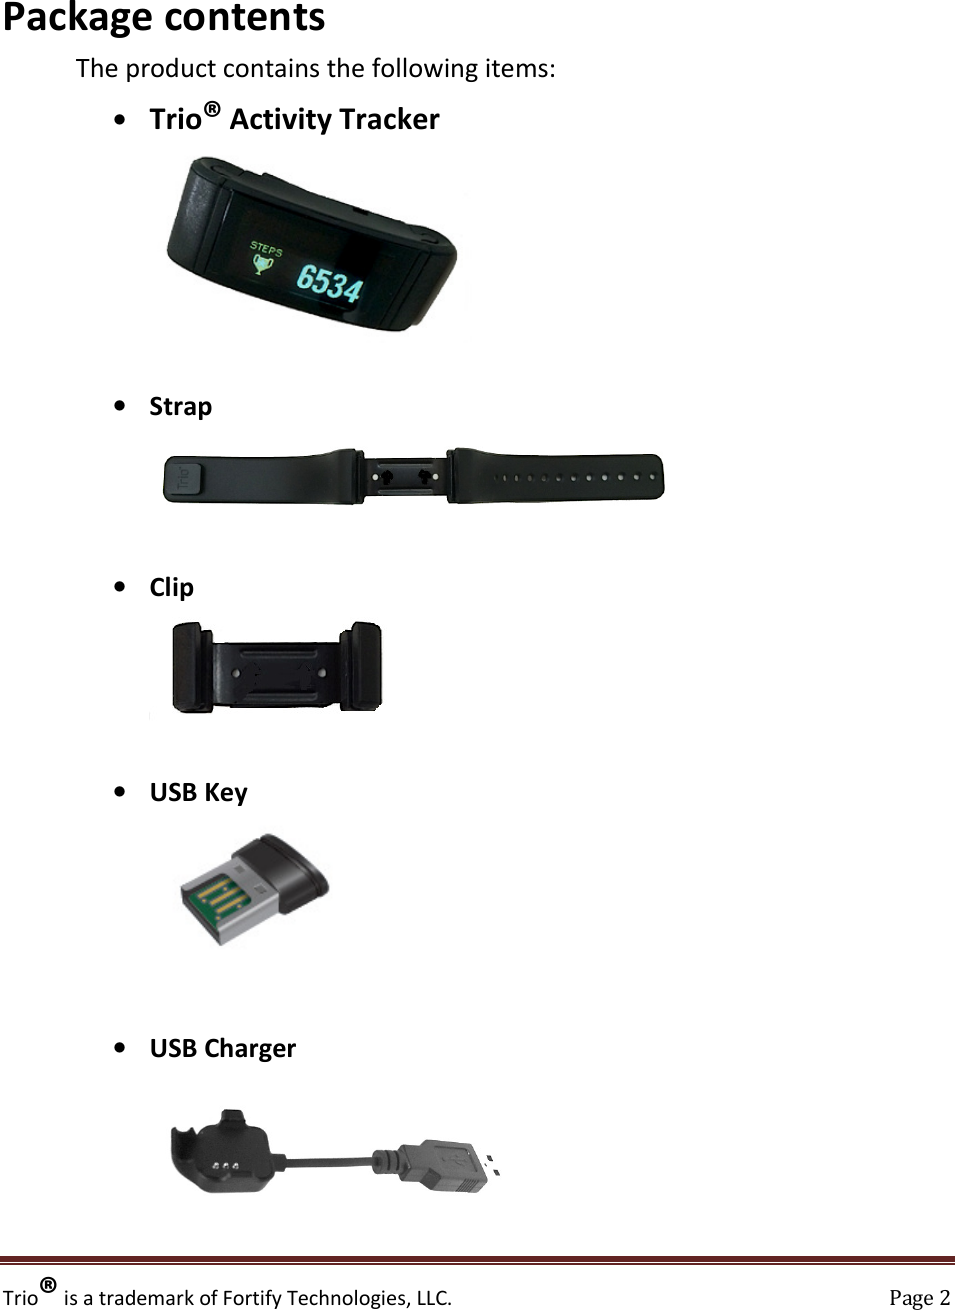 Trio® is a trademark of Fortify Technologies, LLC.    Page 2  Package contents  The product contains the following items: • Trio® Activity Tracker   • Strap   • Clip   • USB Key   • USB Charger    